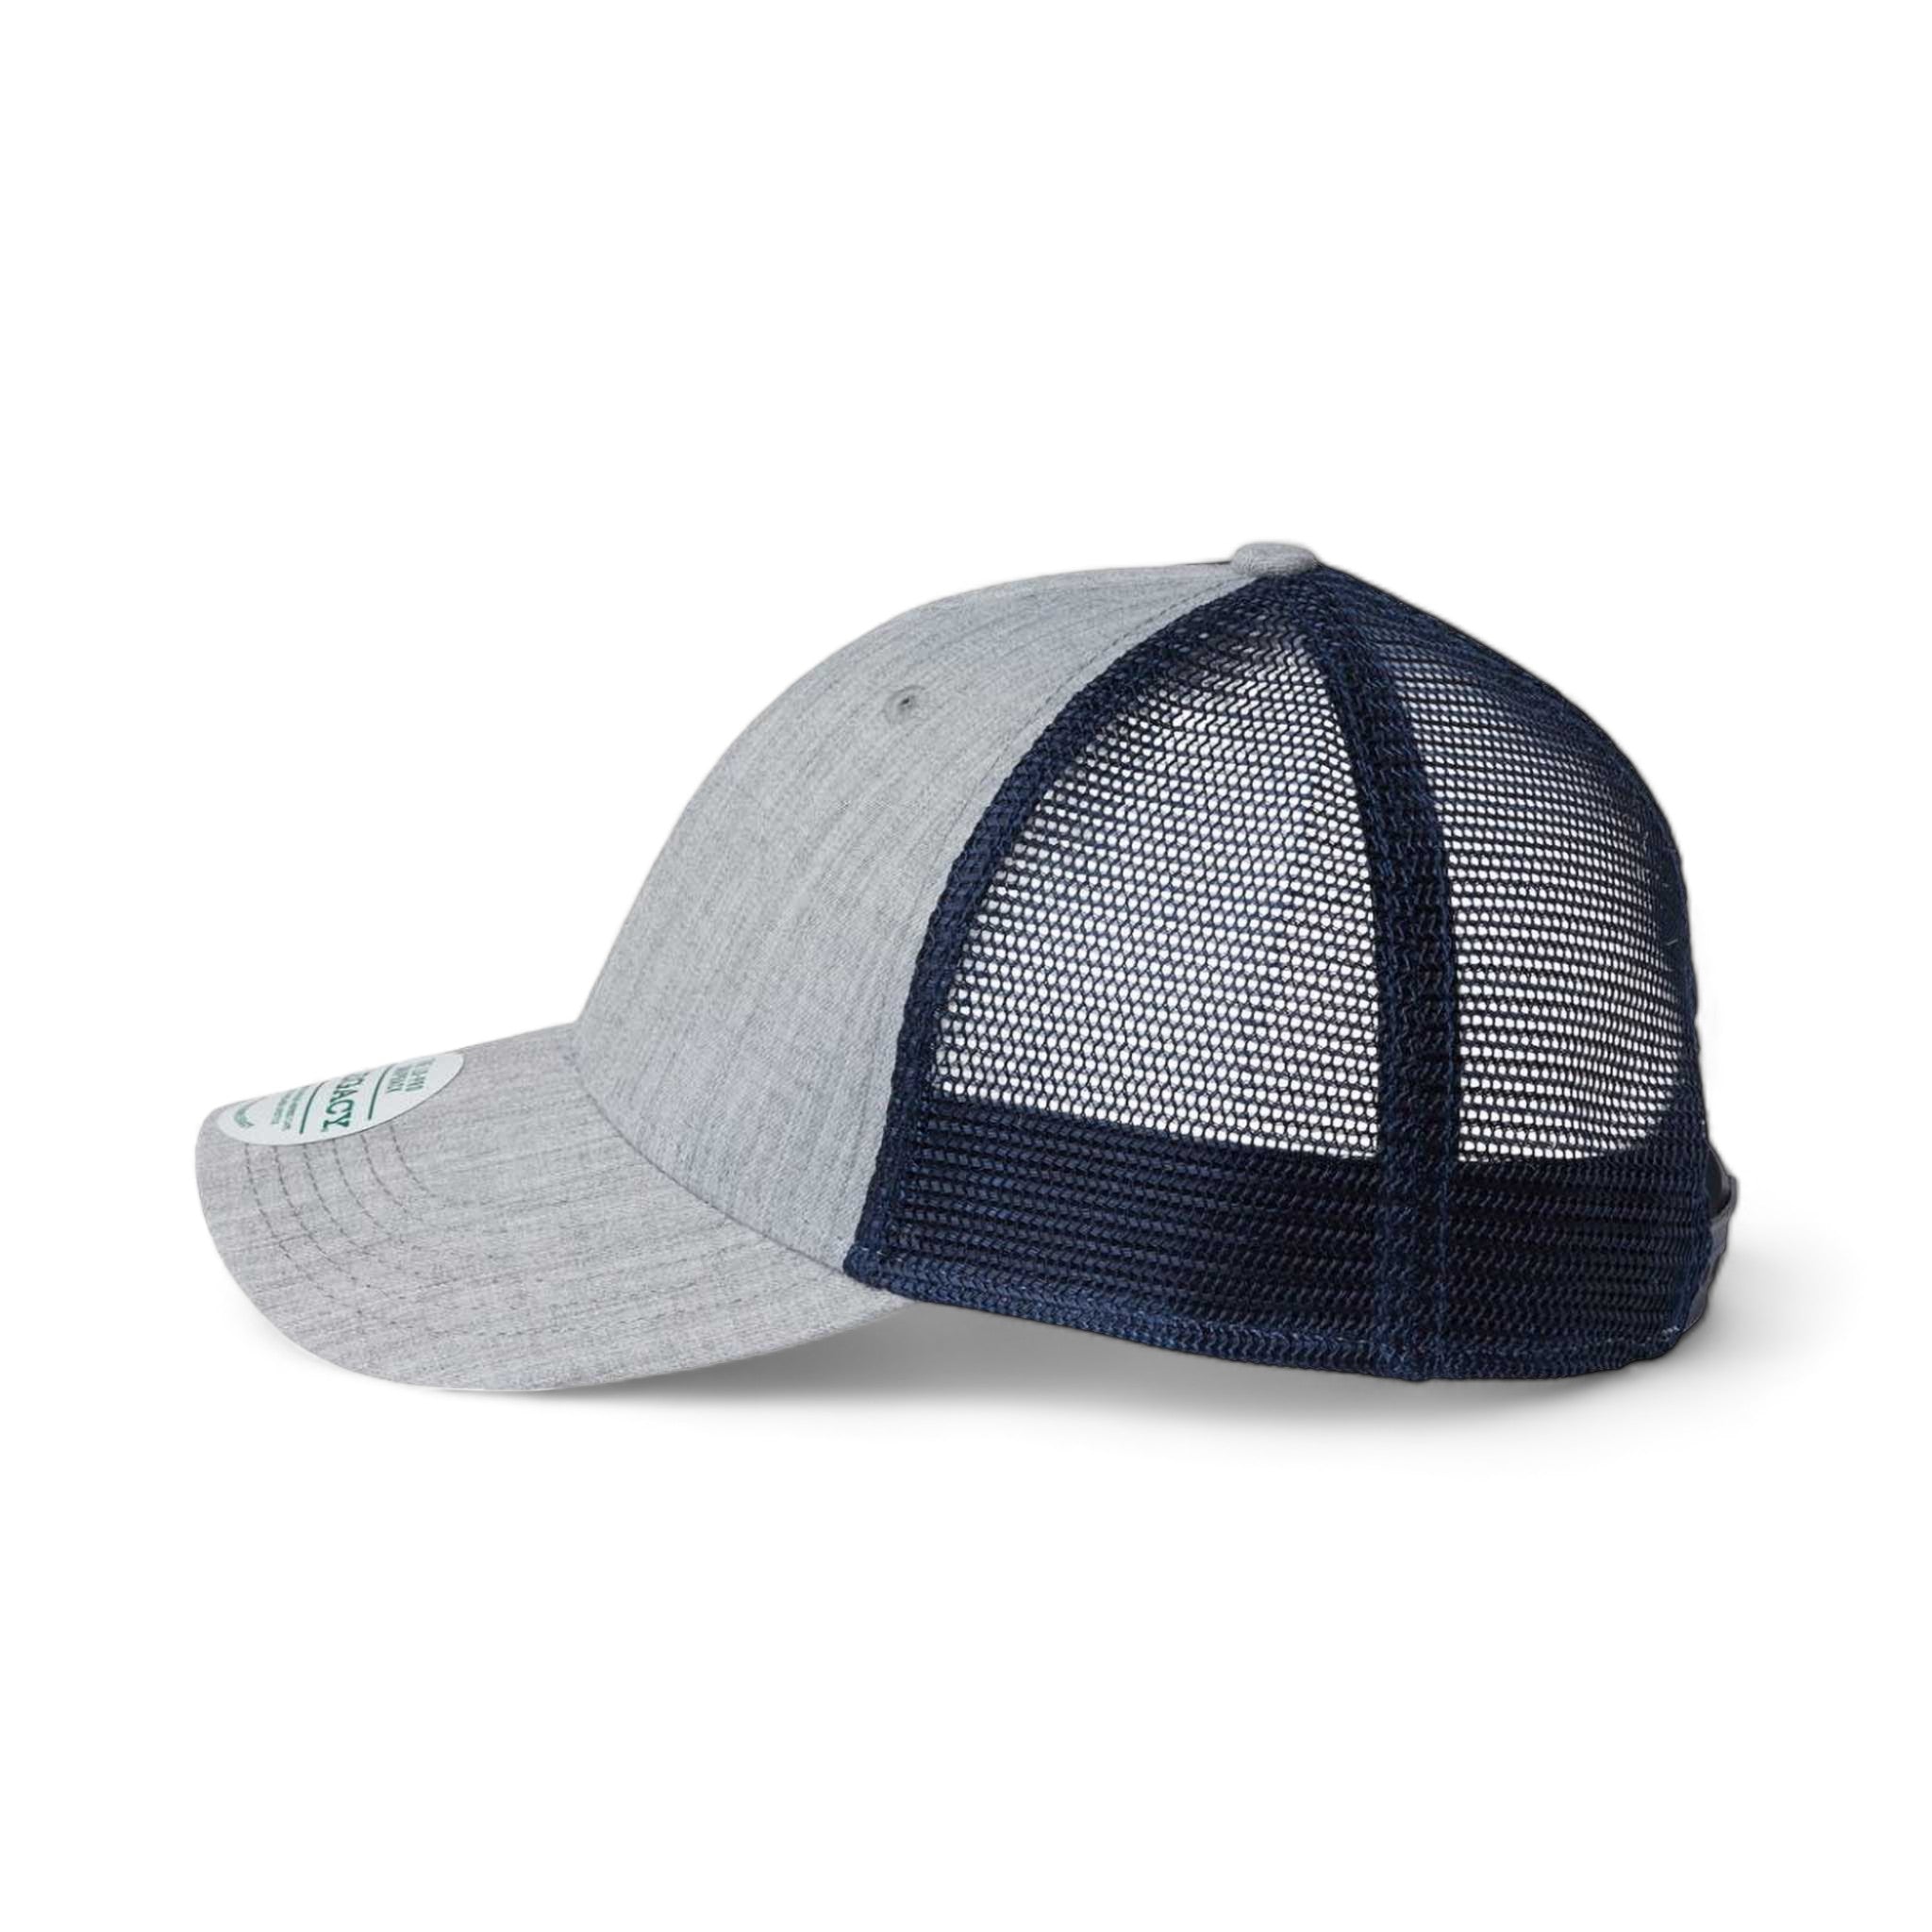 Side view of LEGACY LPS custom hat in heather grey and navy